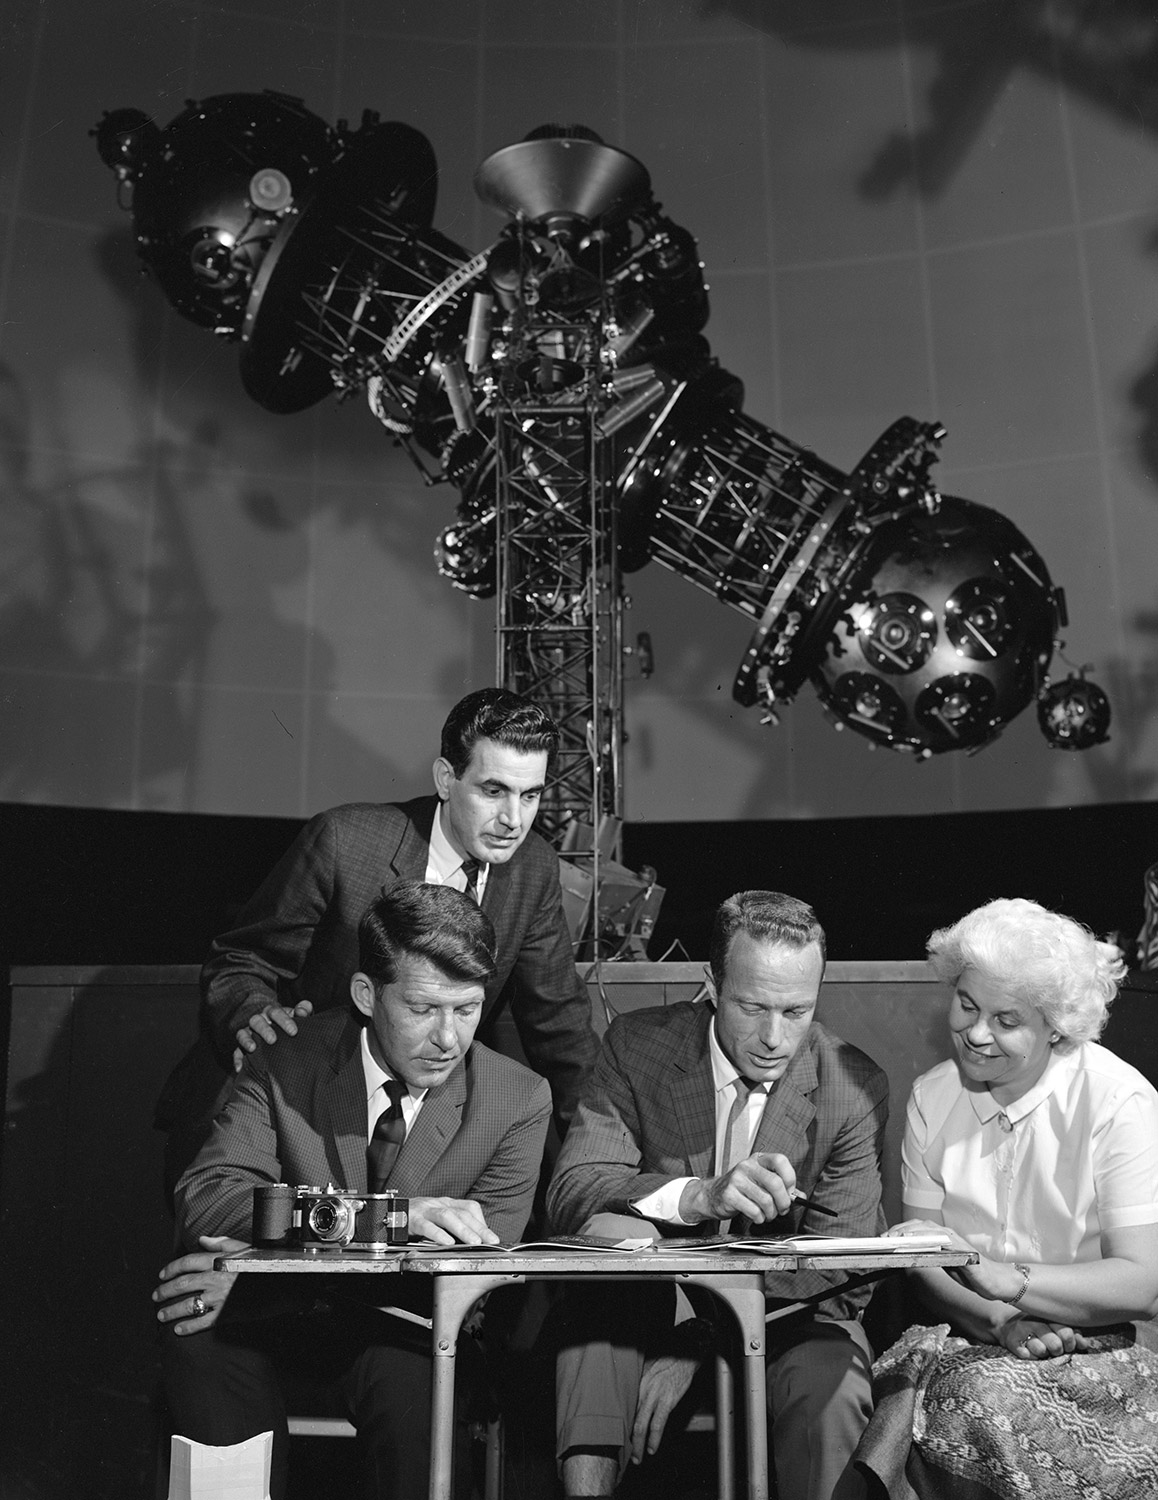 Wally Schirra and Scott Carpenter (sitting) get some help while studying star charts at Morehead Planetarium. Credit: NASA via Retro Space Images.